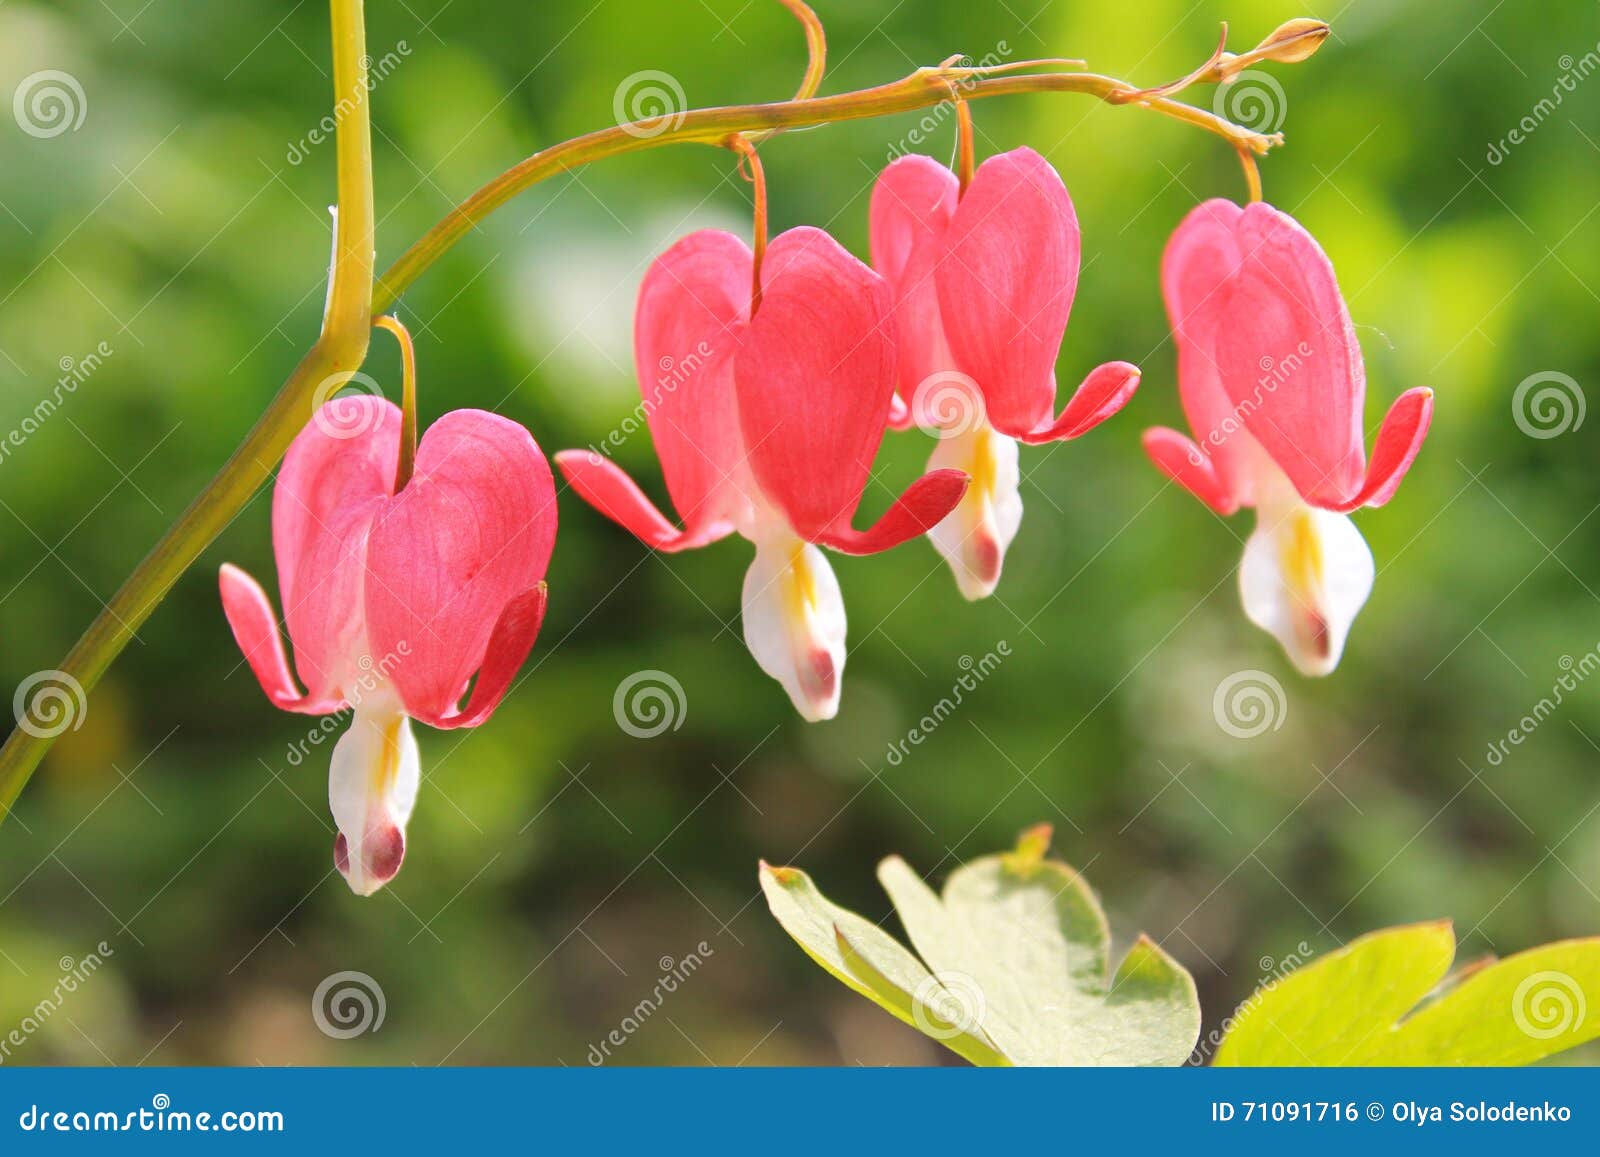 3dRose lsp_49864_1 Pink Bleeding Heart Flowers Floral Photography Single Toggle Switch